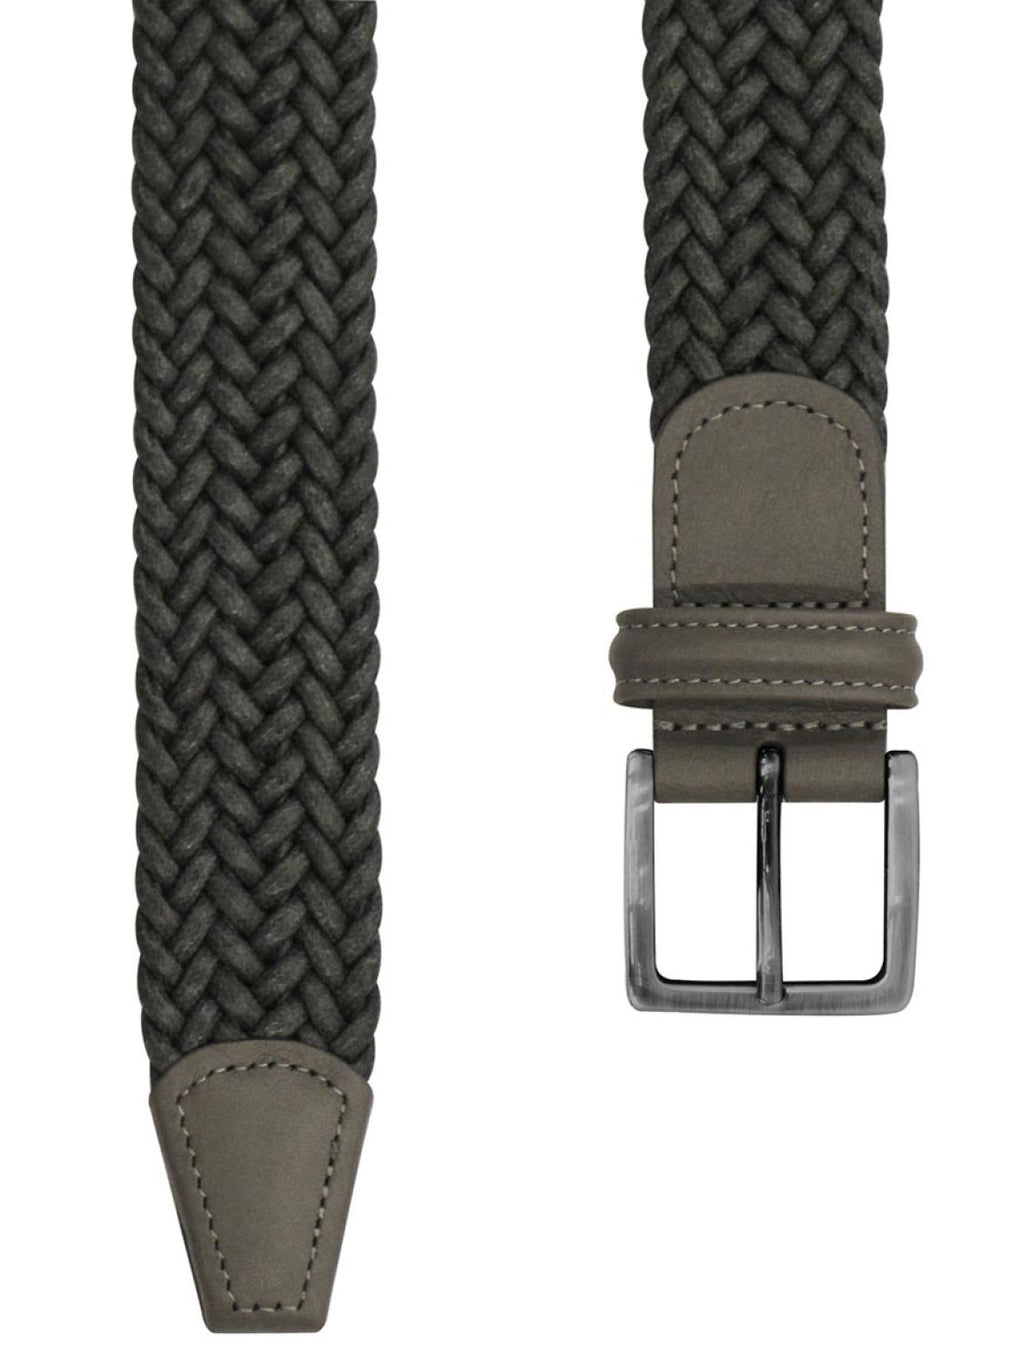 Anderson's Narrow Woven Leather Belt